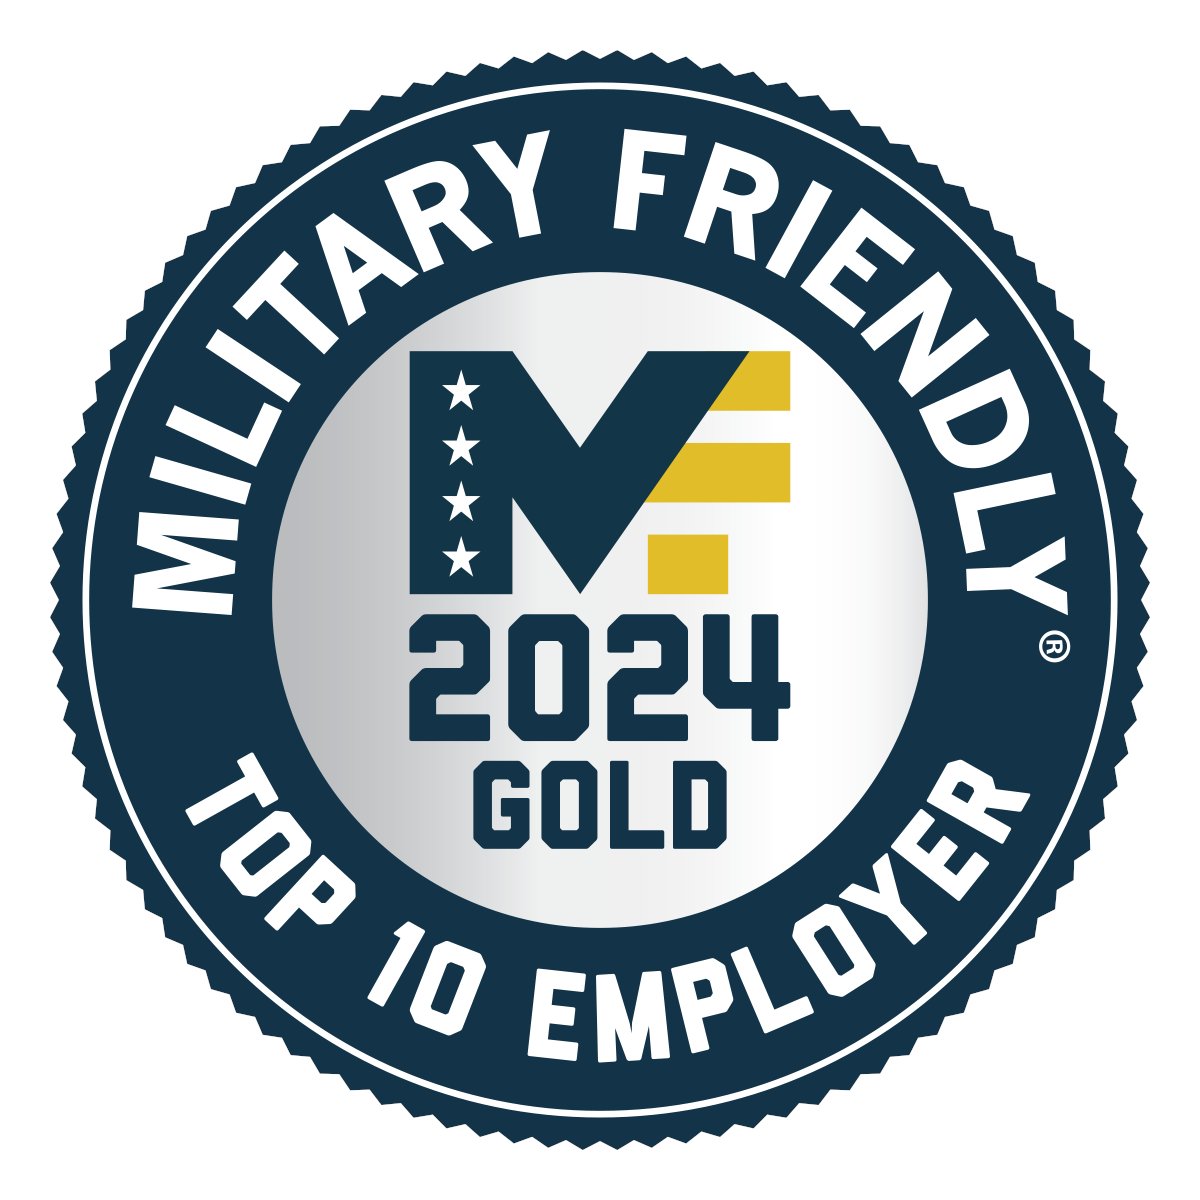 Today we say thank you to all who have served our great nation. We are also proud to announce that we have been named a @MilitaryFriendly Employer for fostering a meaningful work environment 4 veterans, service members & families. Learn more: ms.spr.ly/6015i68tt.